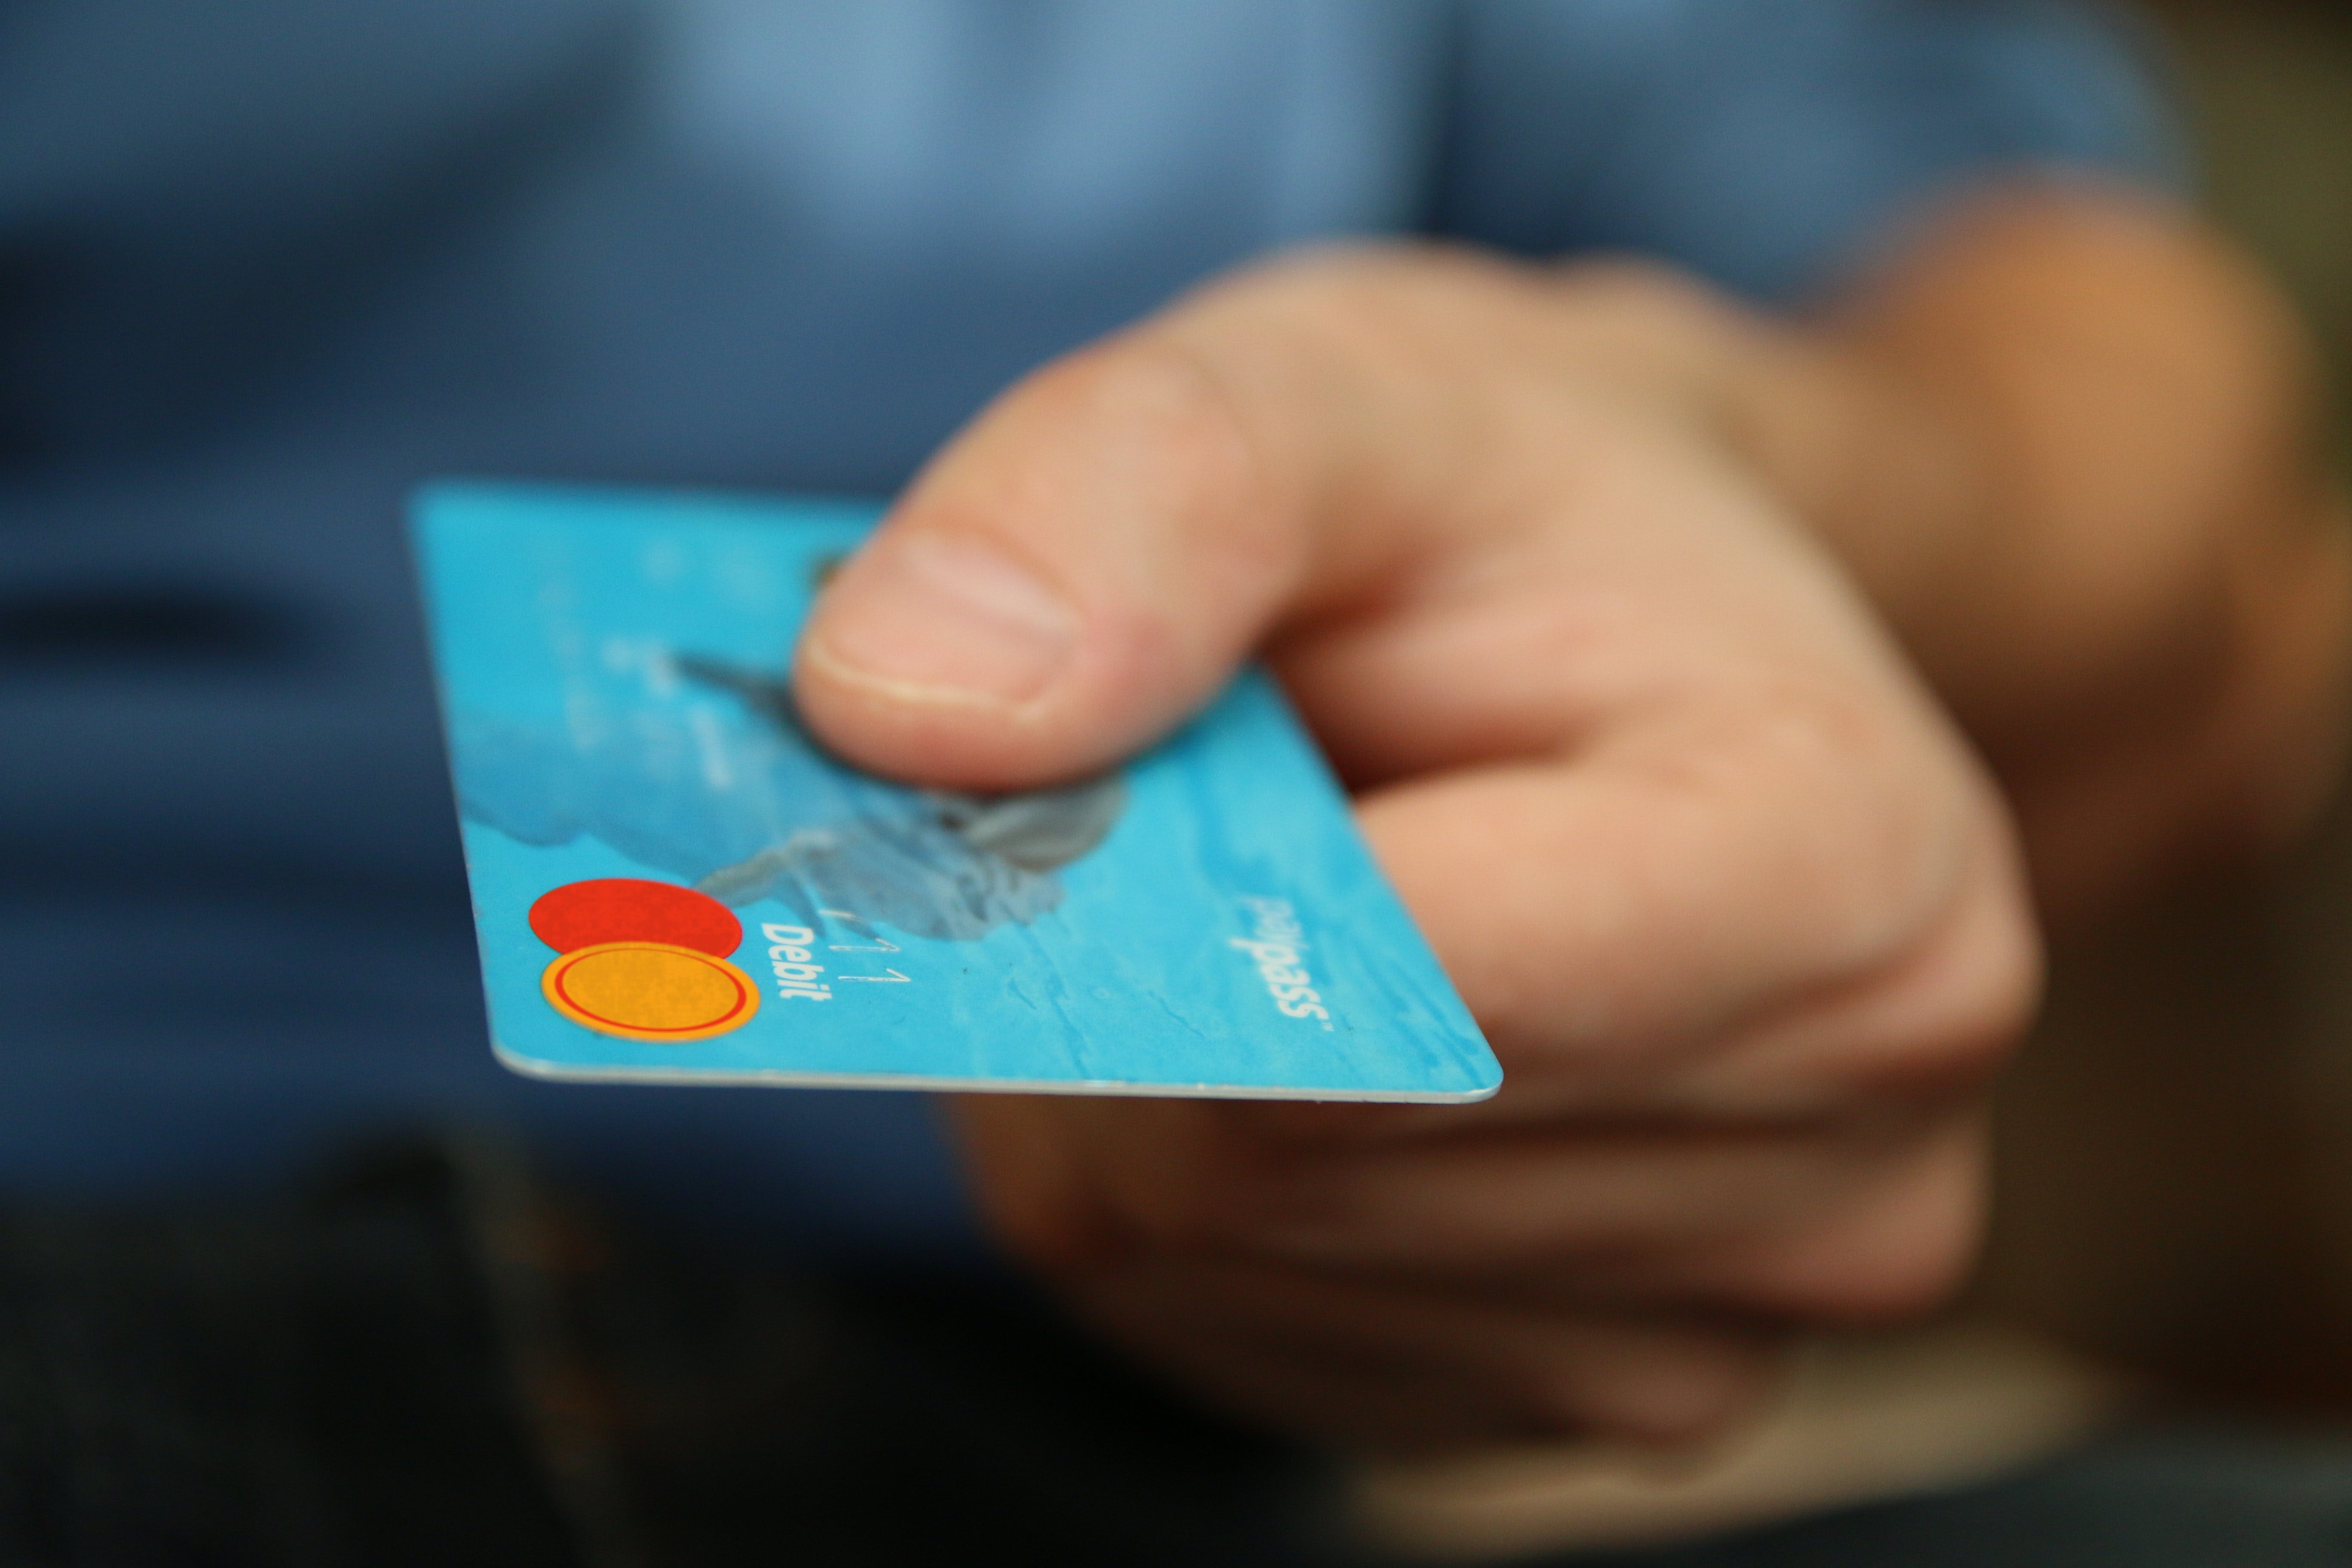 Someone holding a bank card | Source: Pexels